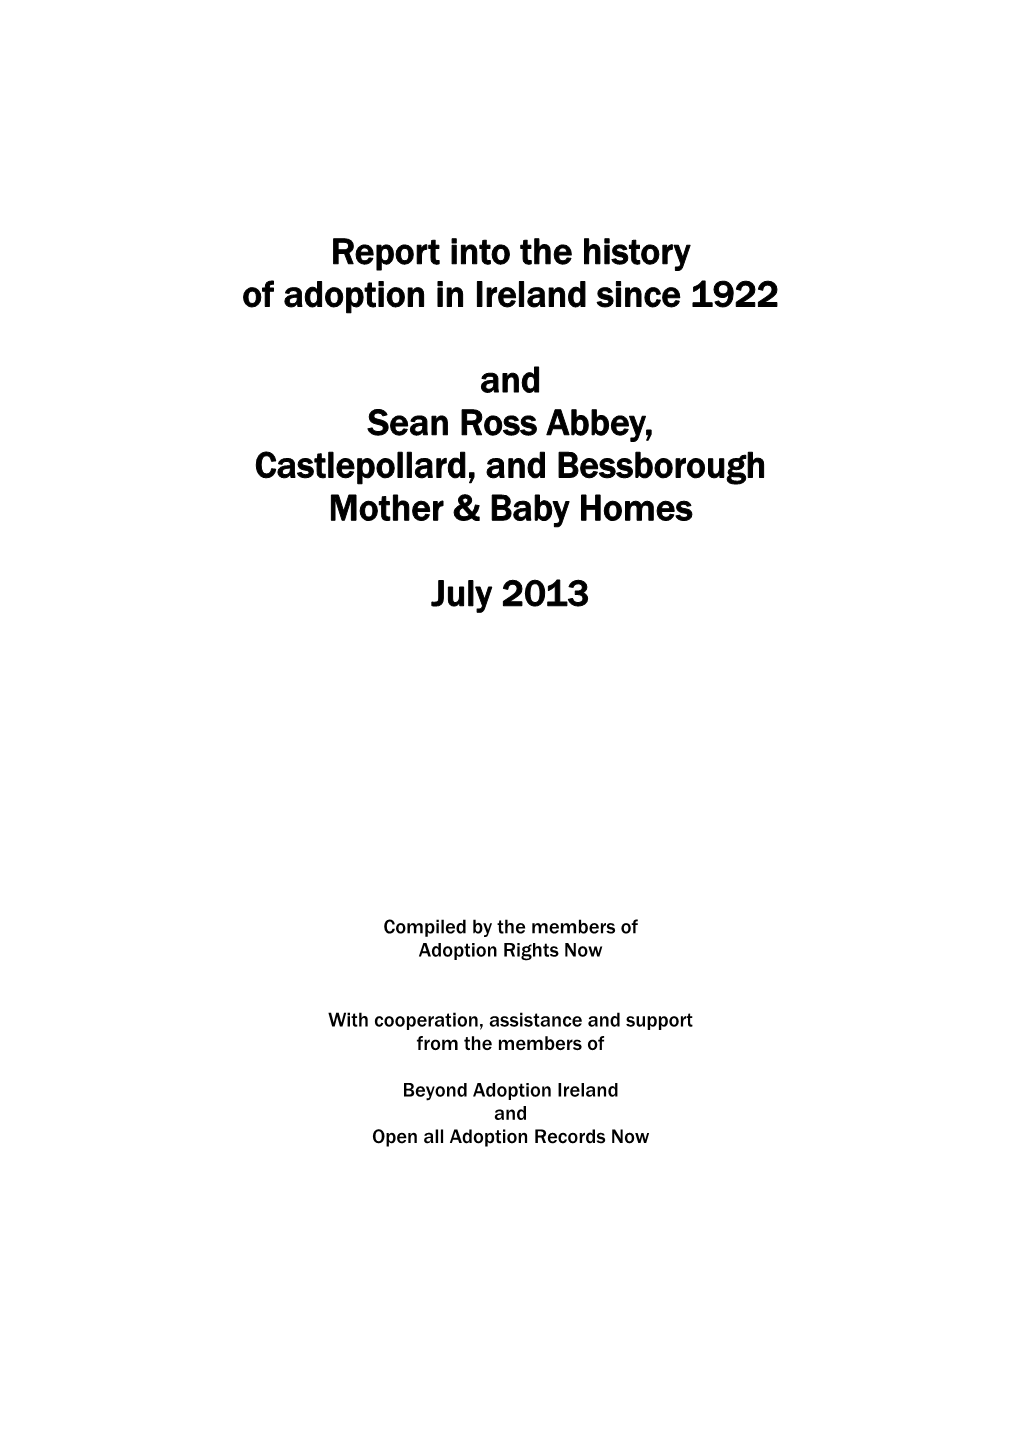 Report Into the History of Adoption in Ireland Since 1922 and Sean Ross Abbey, Castlepollard, and Bessborough Mother & B